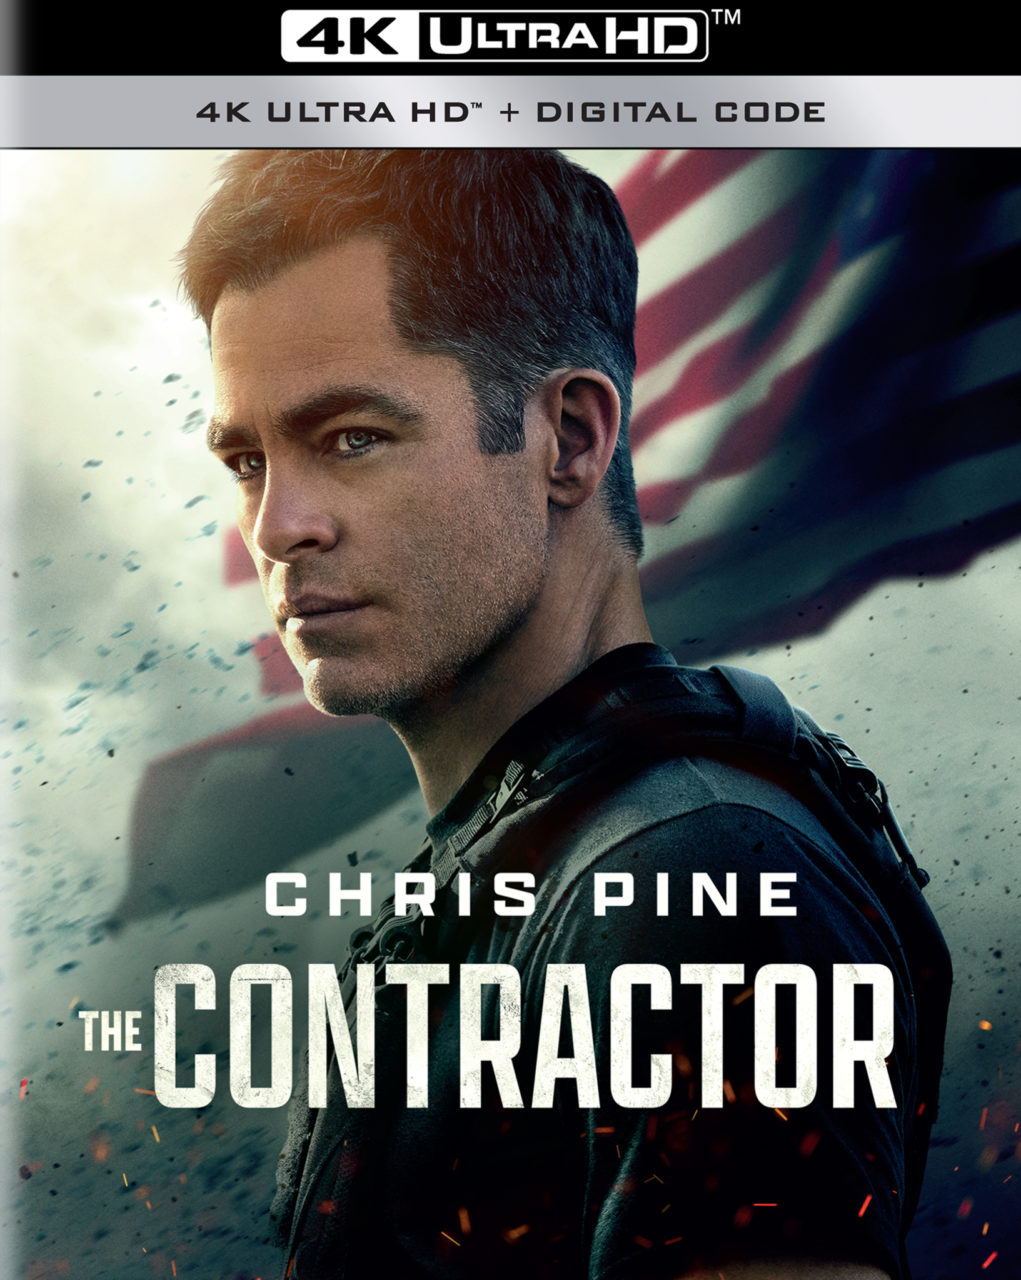 The Contractor 4K Ultra HD Combo Pack cover (Paramount Home Entertainment)